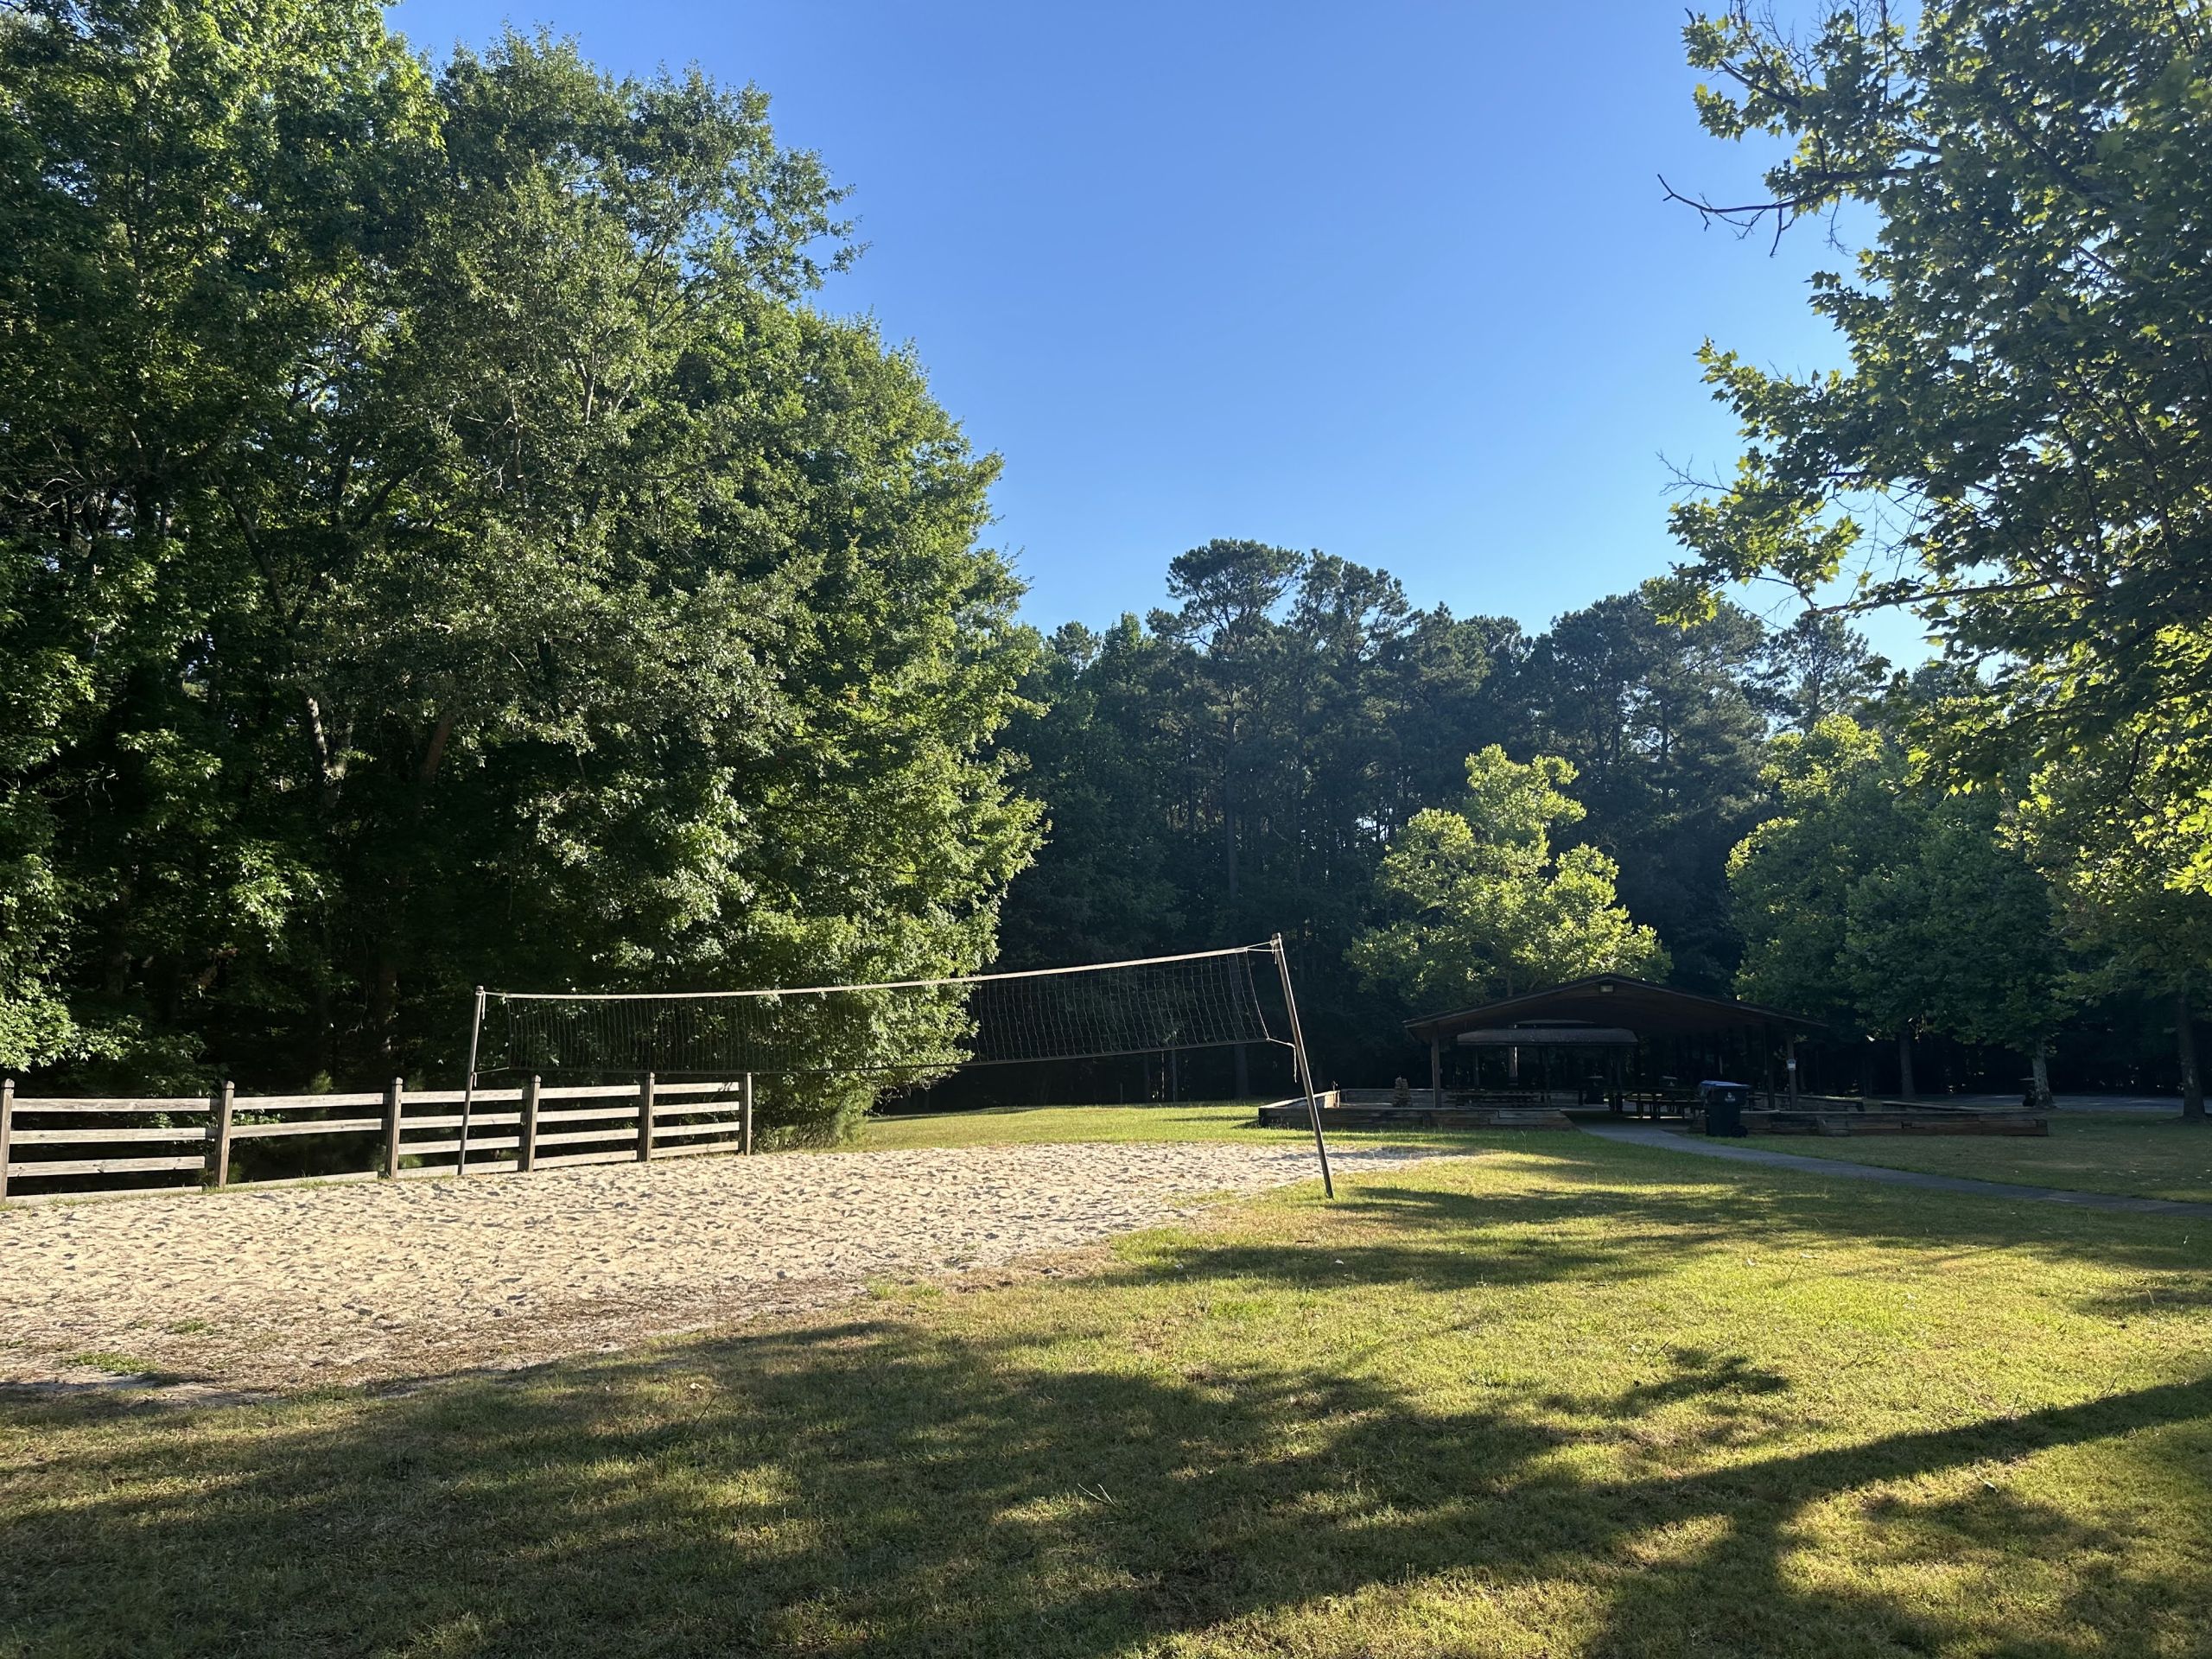 image A volleyball court surrounded by trees and a fenced area with a pavilion in the background under a clear blue sky.